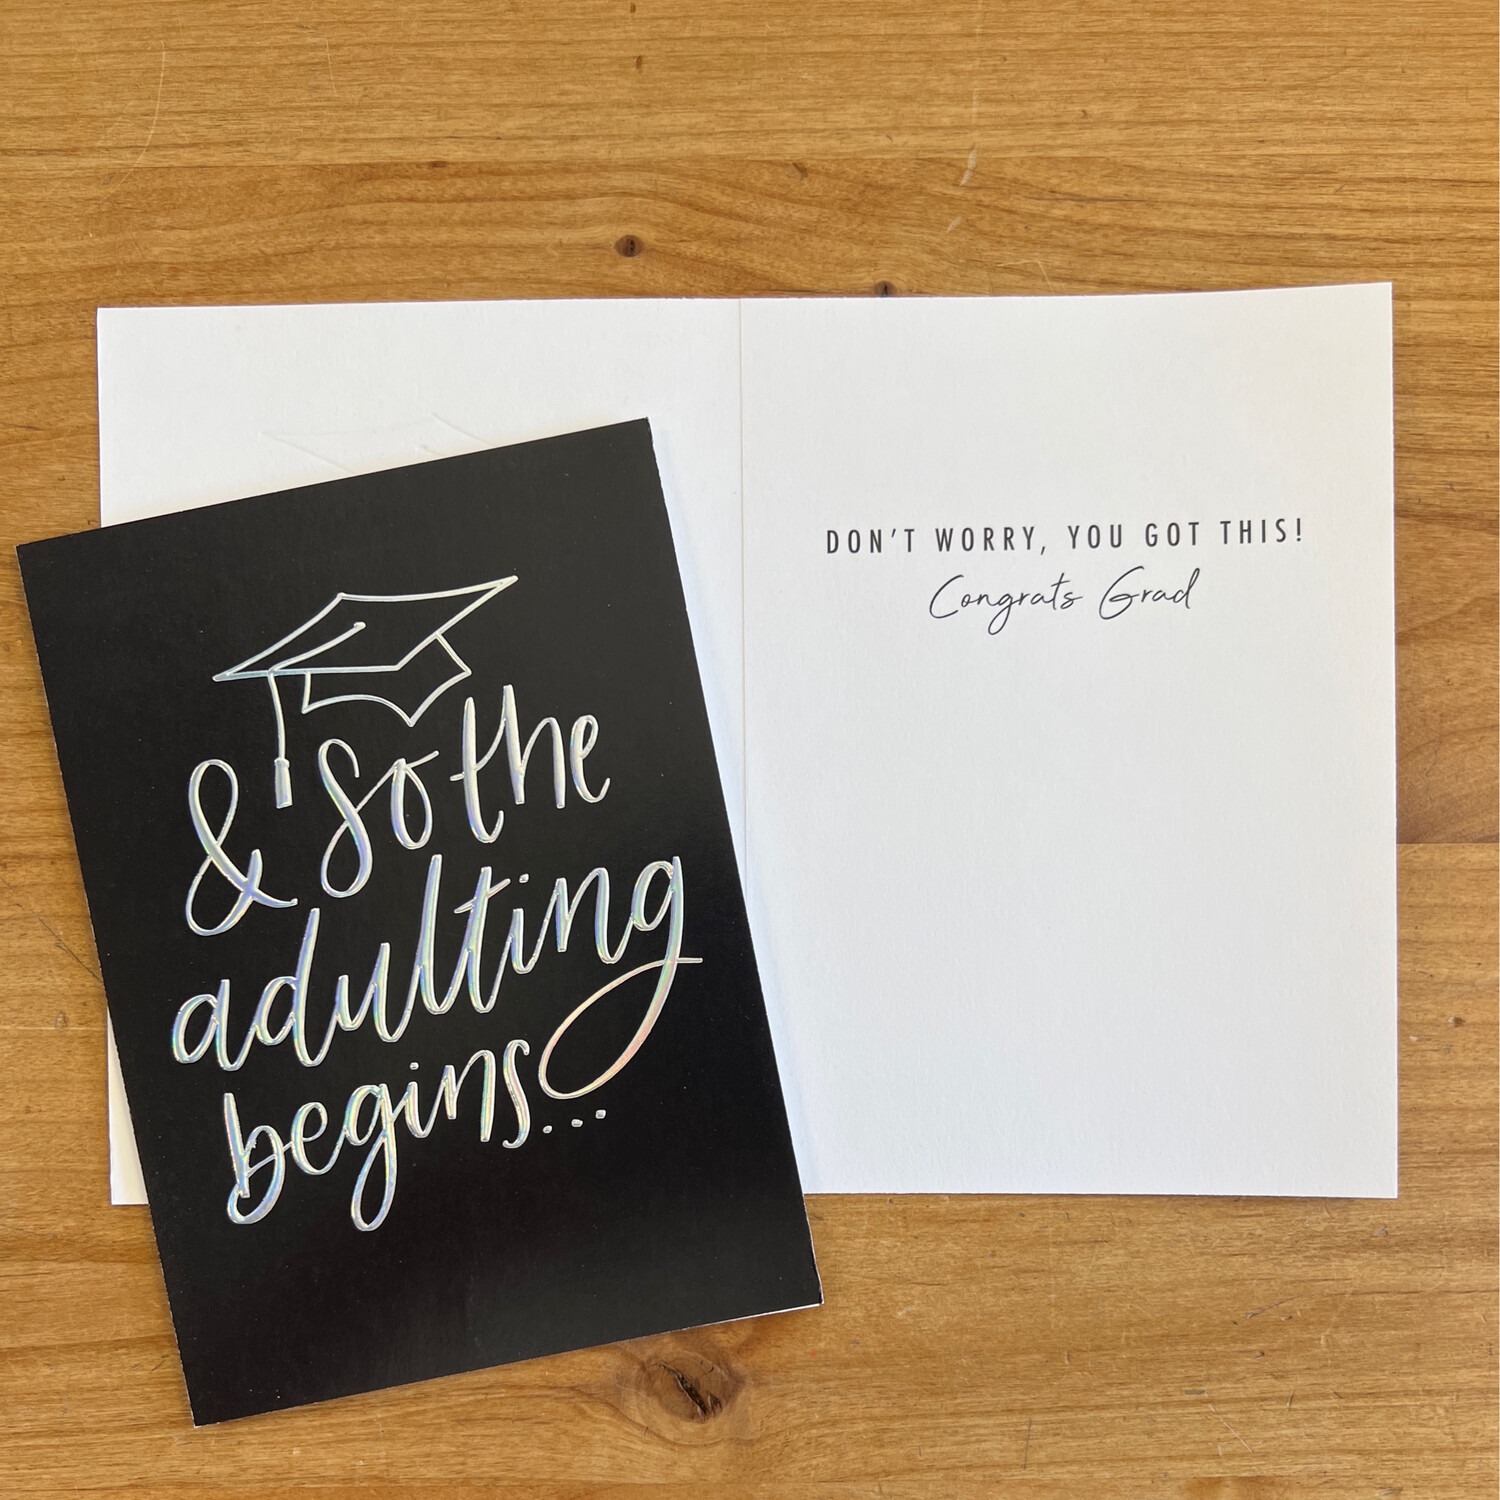 The Adulting Begins Grad Card